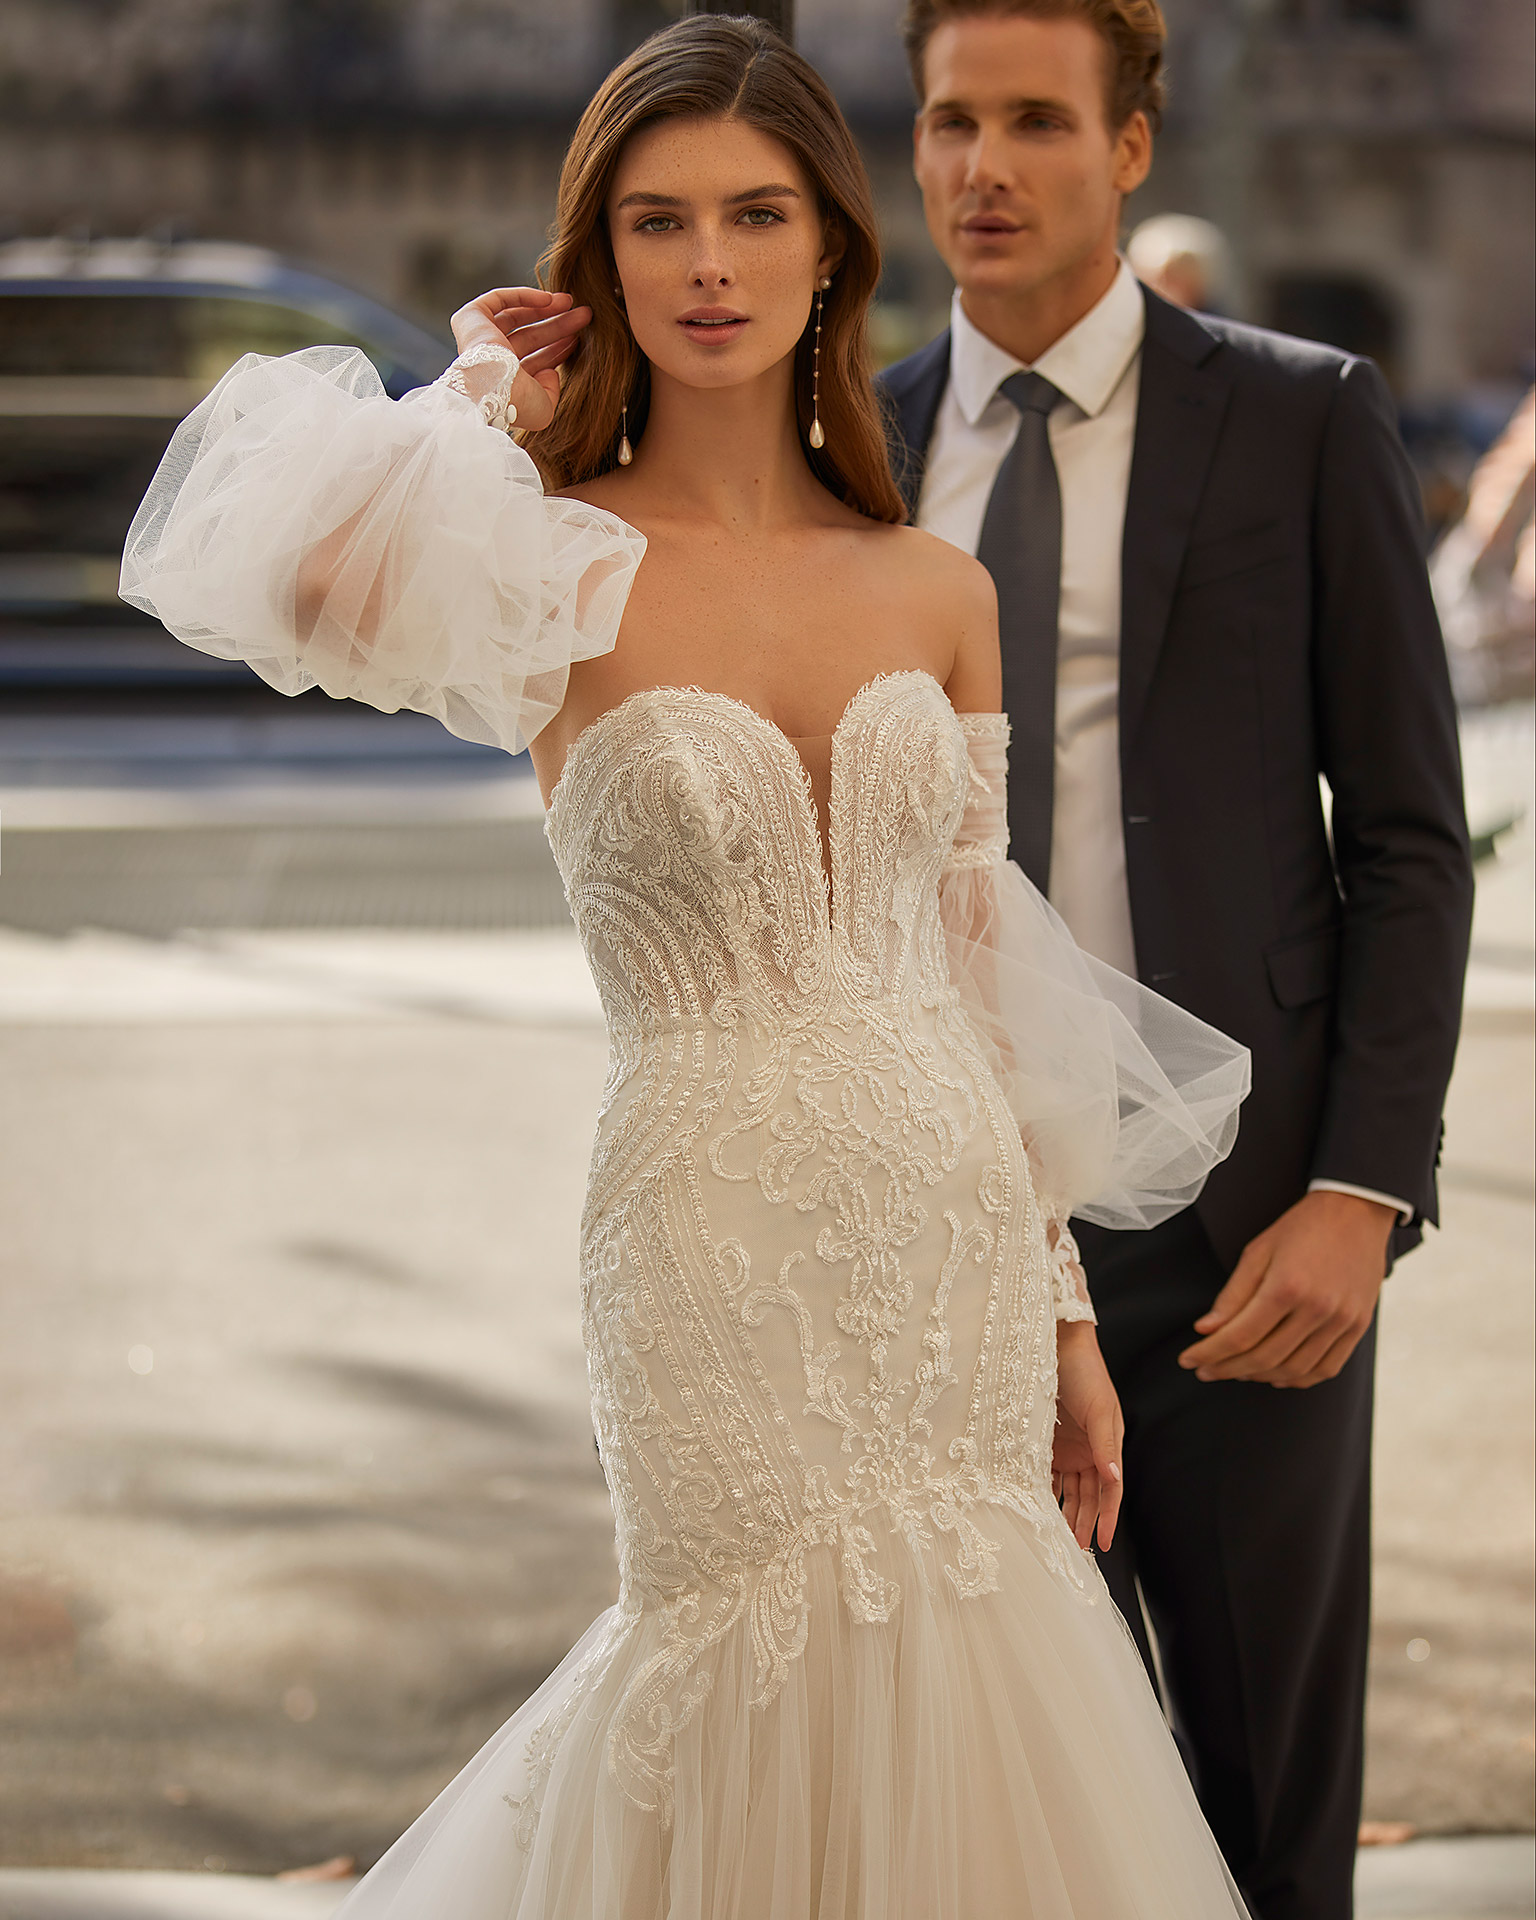 Sexy mermaid-style wedding dress, made of lace and tulle, with voluminous sleeves; with a strapless sweetheart neckline, a button-up back, and long puffed tulle and lace sleeves. Dreamy Luna Novias outfit made of lace embellished with beadwork. LUNA_NOVIAS.